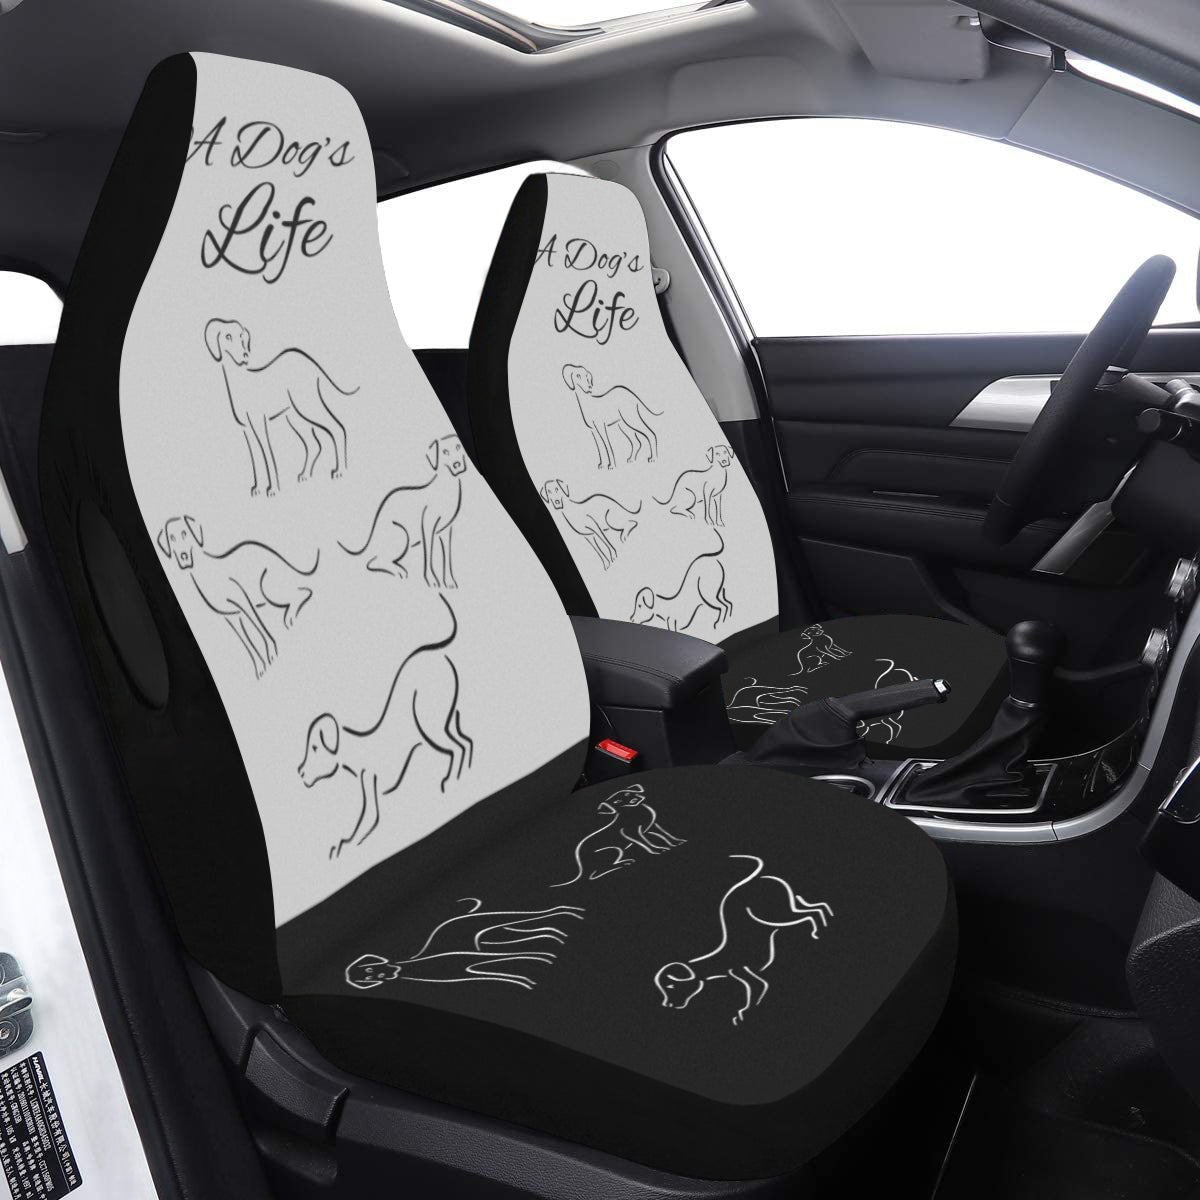 A Dog's Life Car Seat Covers (Set of 2) - 2